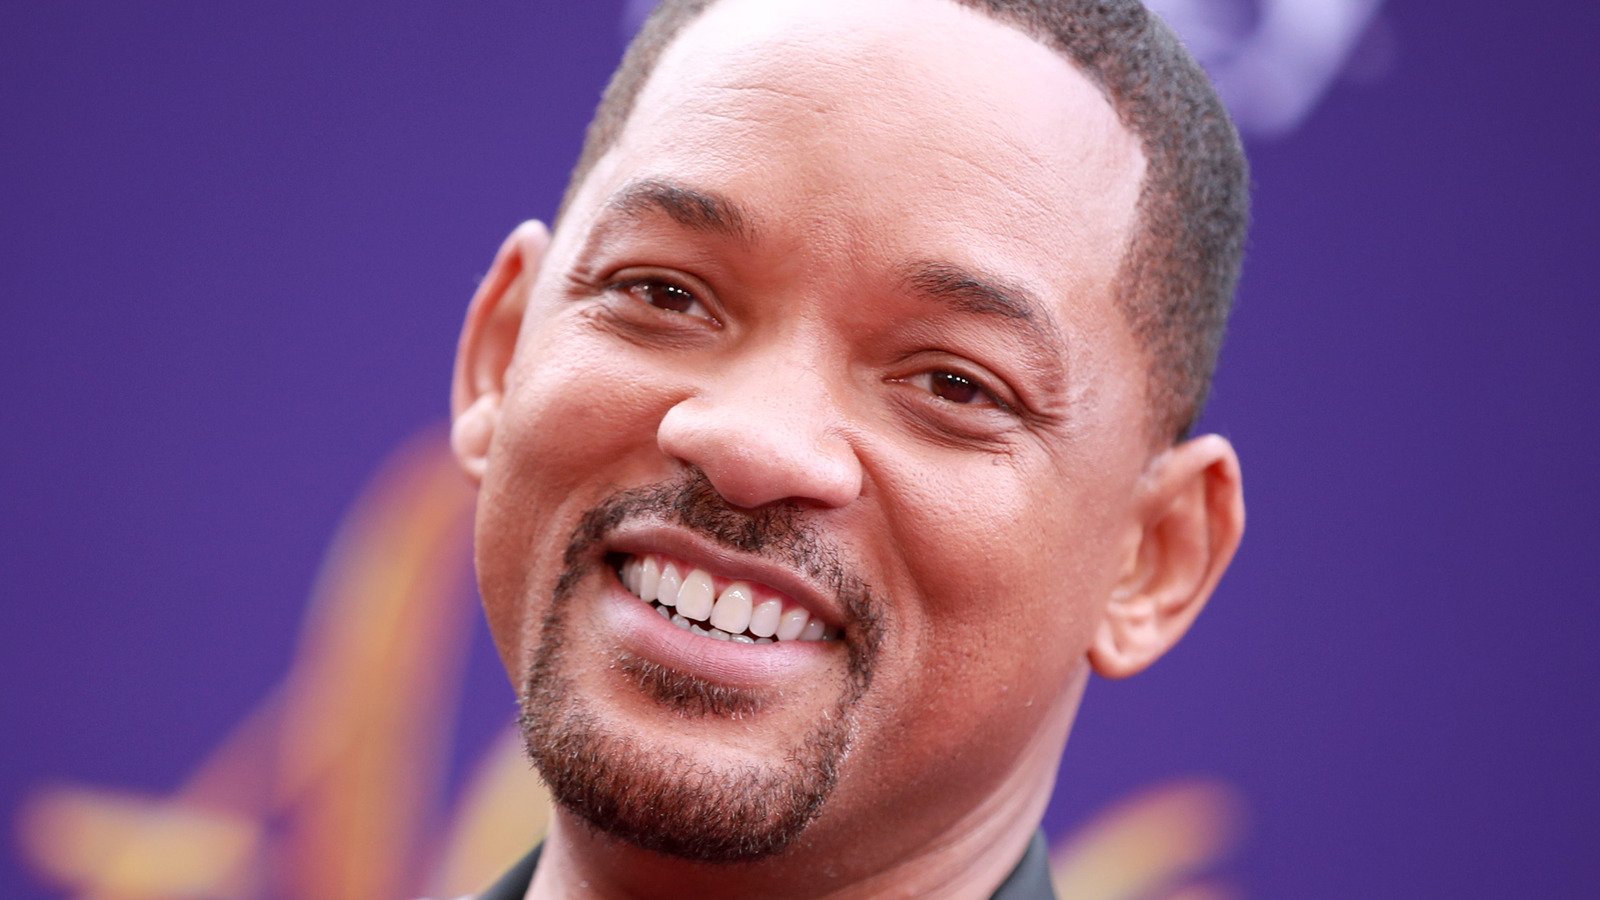 The Transformation Of Will Smith From Childhood To 53 Years Old